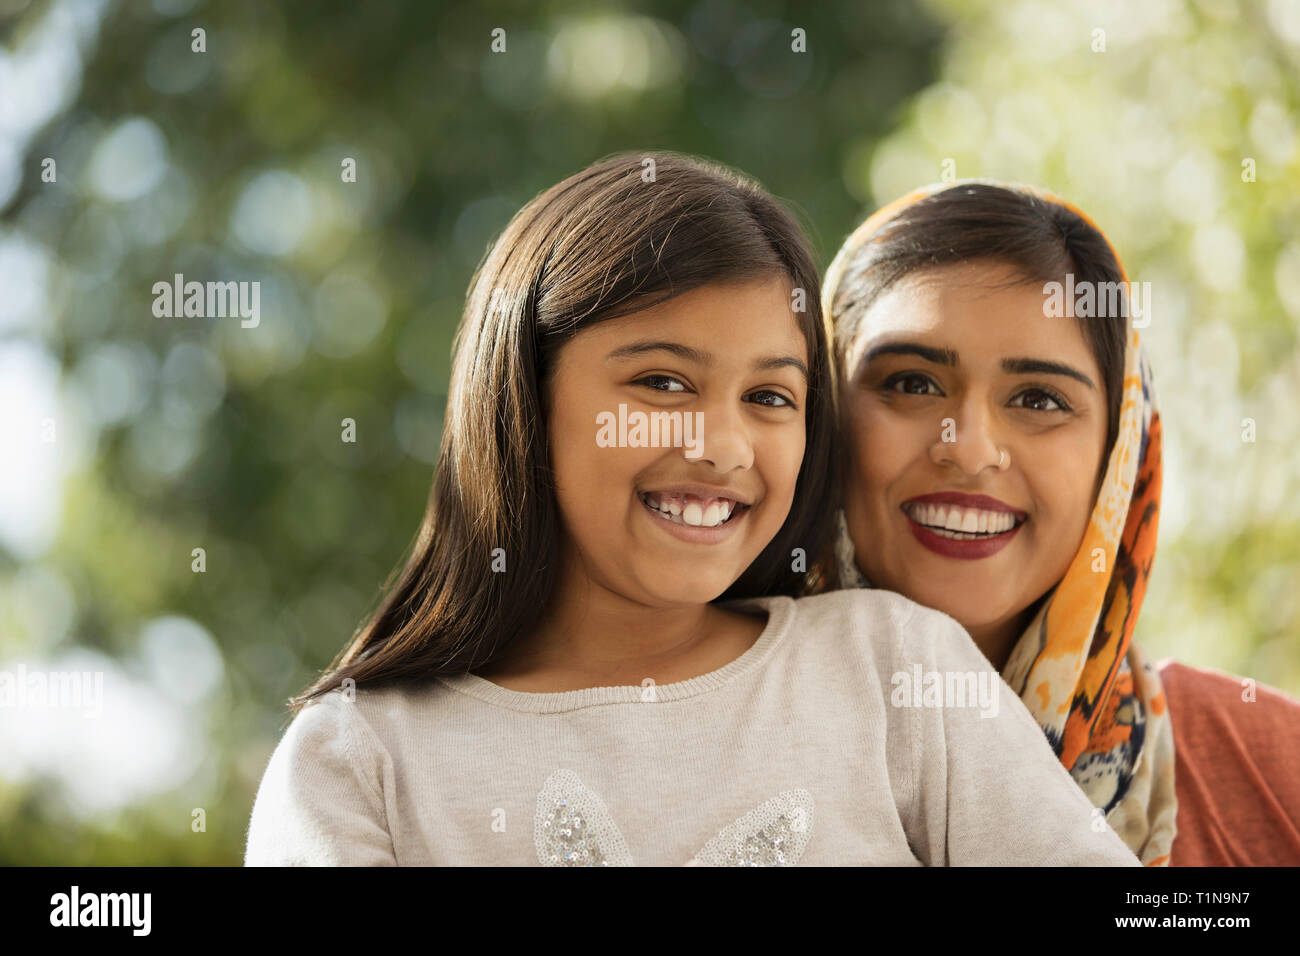 Portrait happy mother and daughter Stock Photo